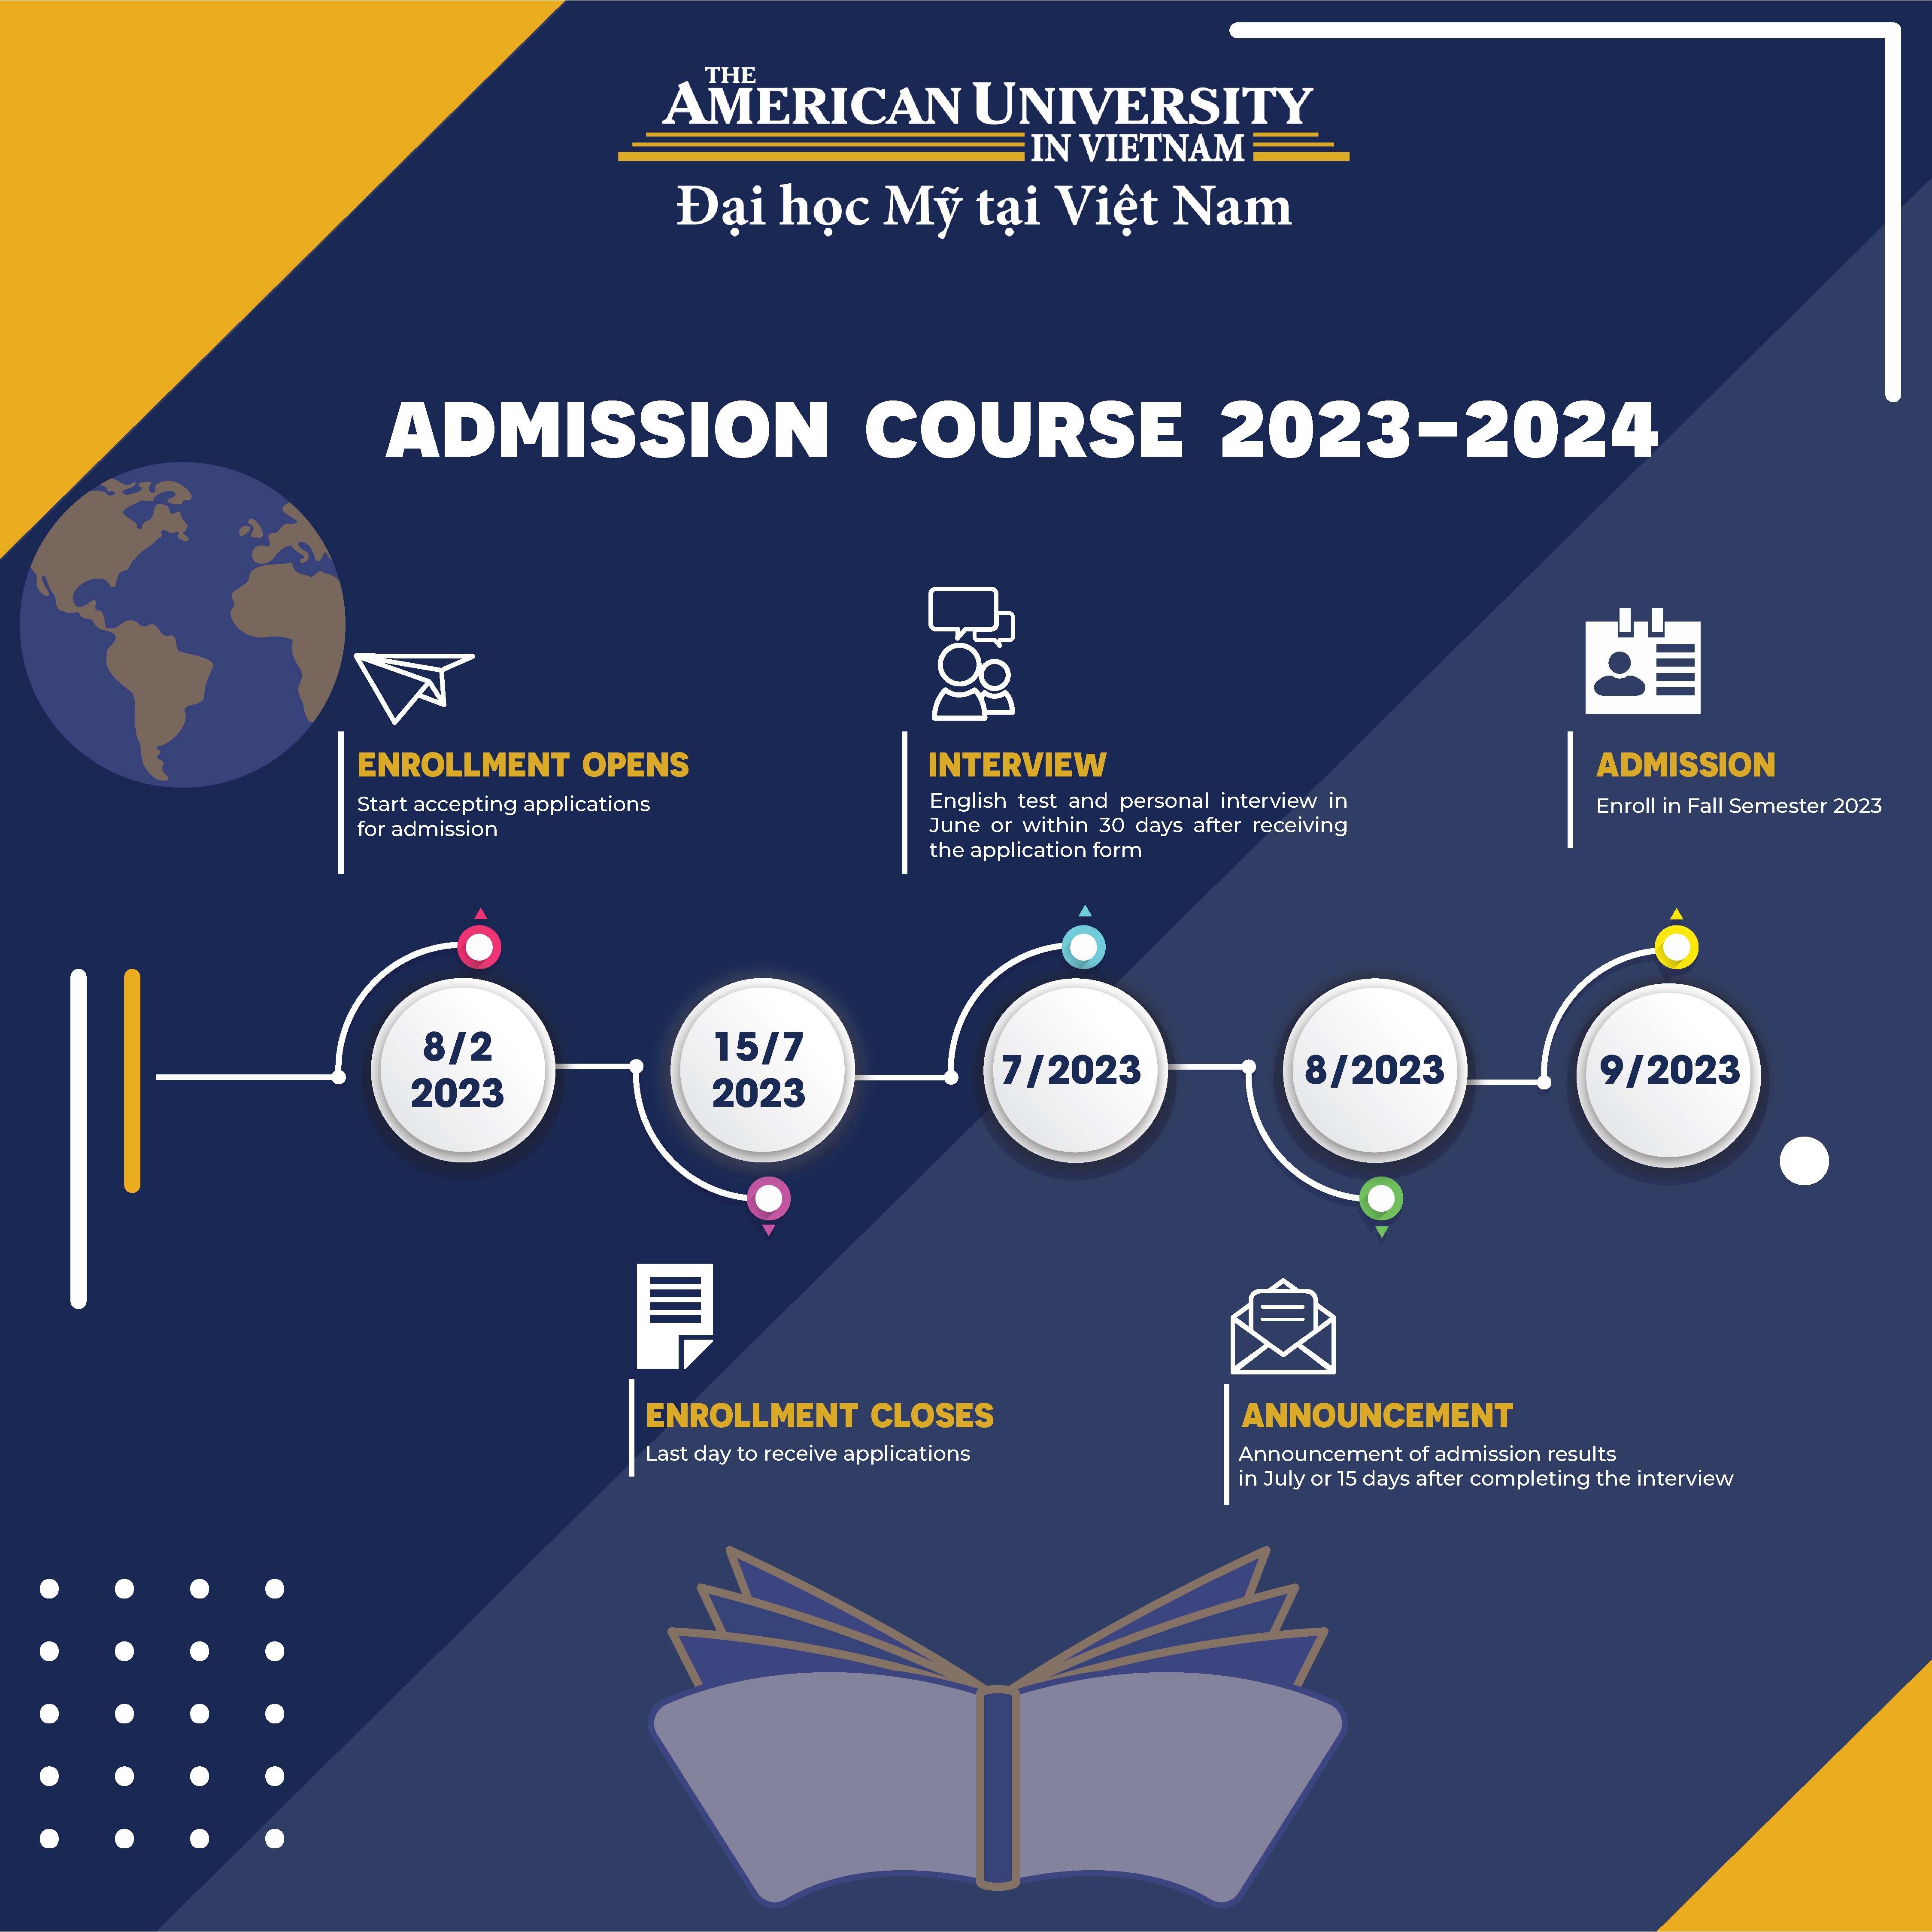 WELCOME TO THE 2023-2024 ACADEMIC YEAR FULL OF NEW OPPORTUNITIES